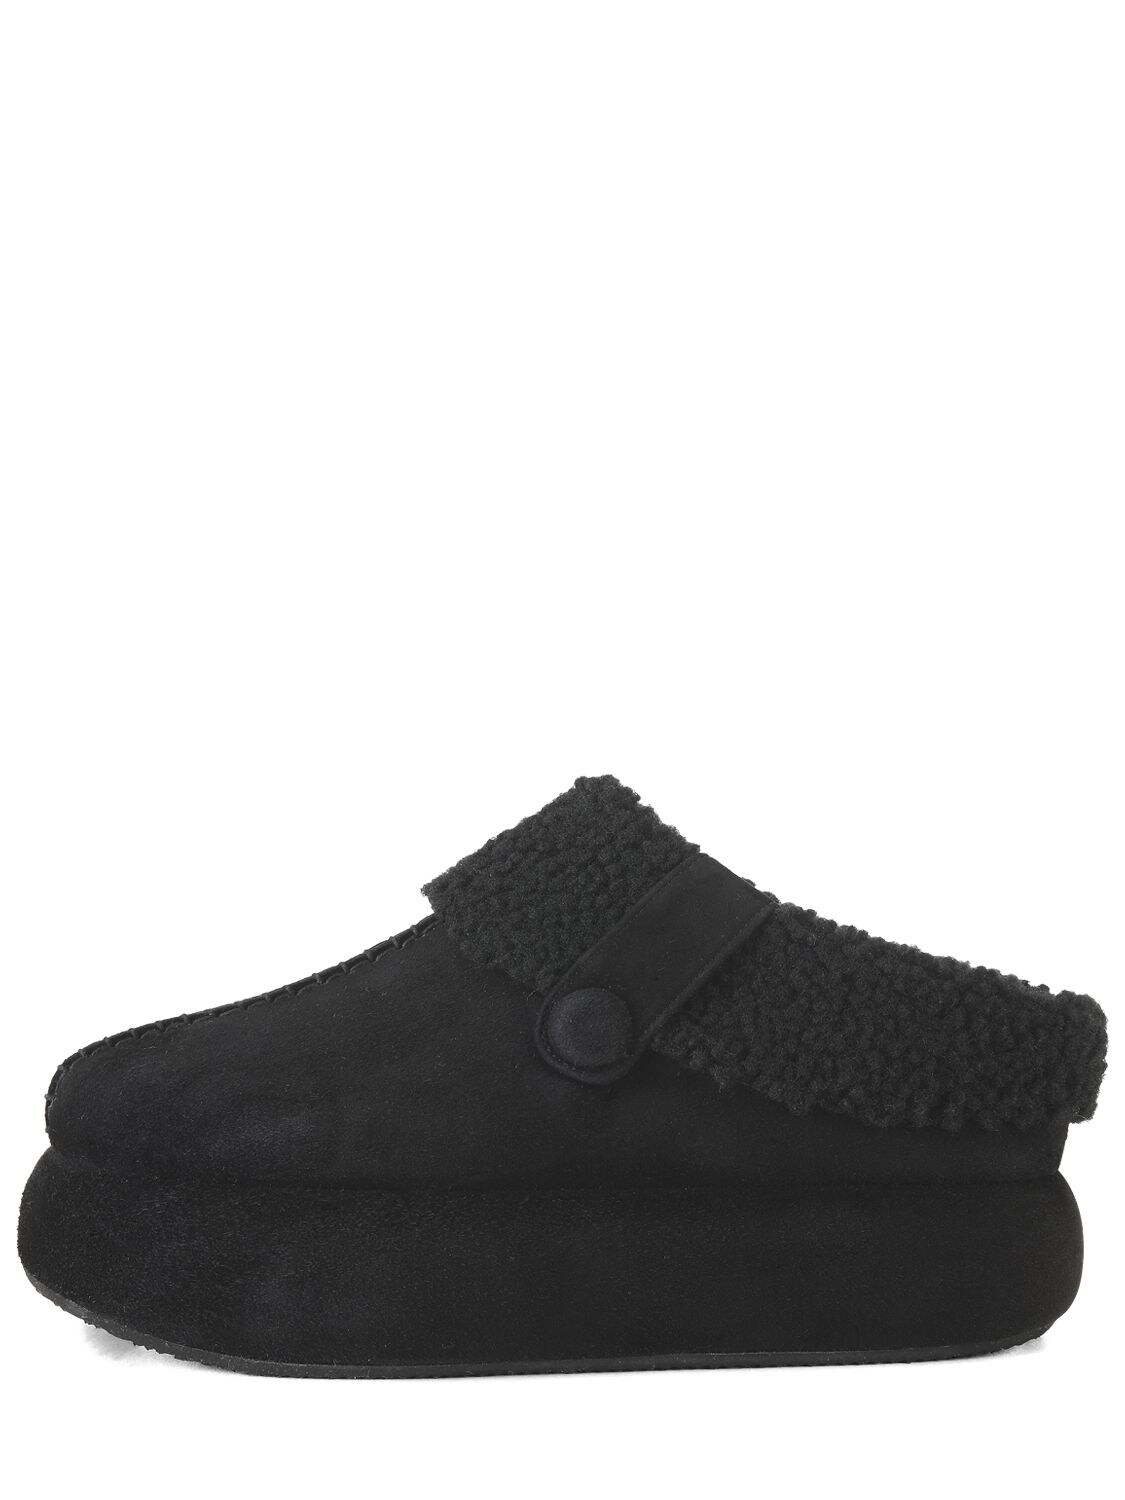 Osoi 40mm Suede & Shearling Wedges In Black